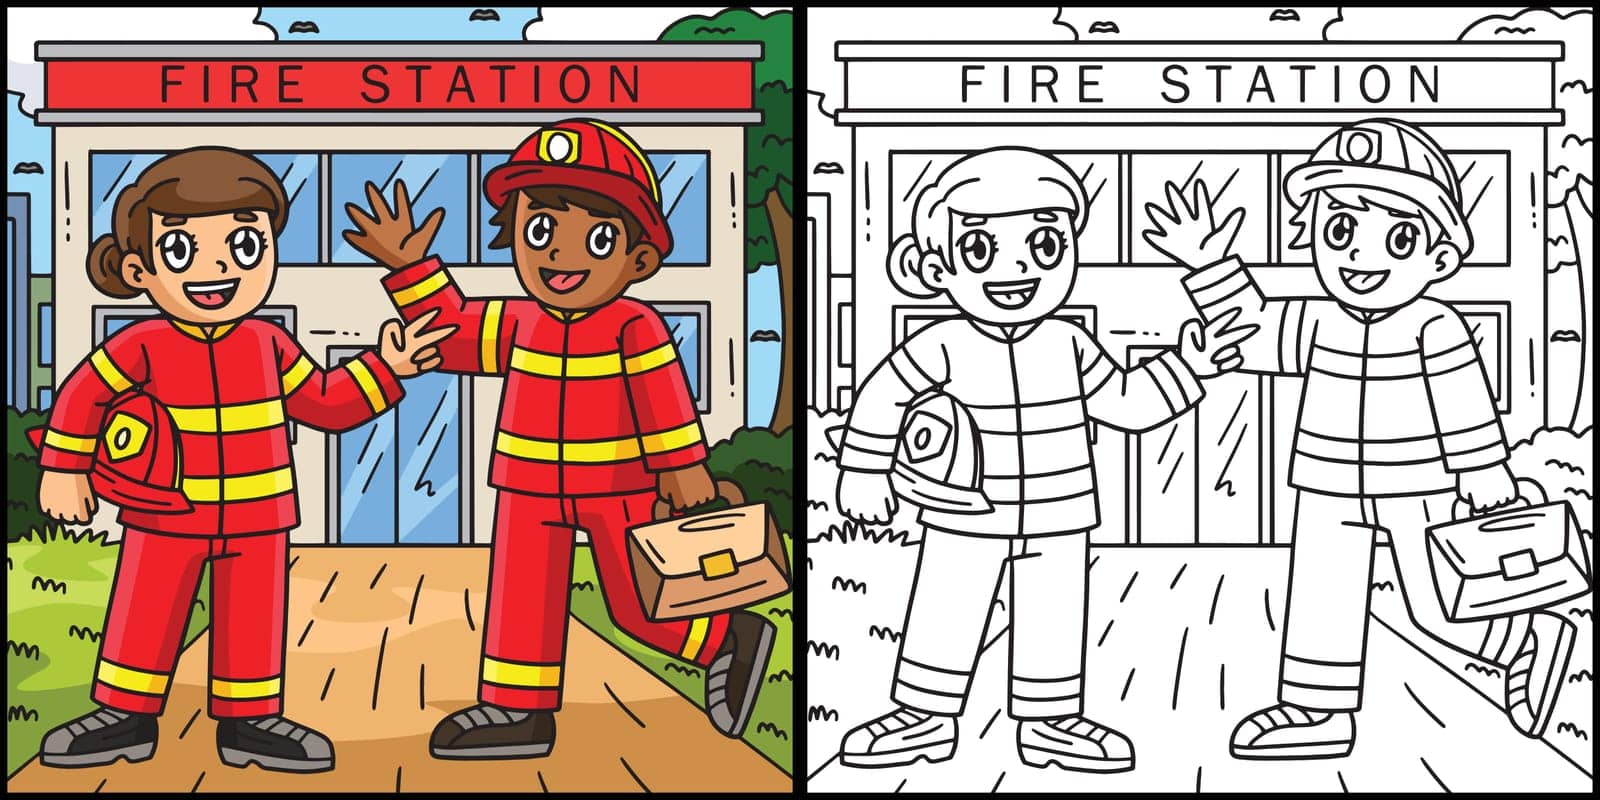 This coloring page shows a Firefighter Friend. One side of this illustration is colored and serves as an inspiration for children.